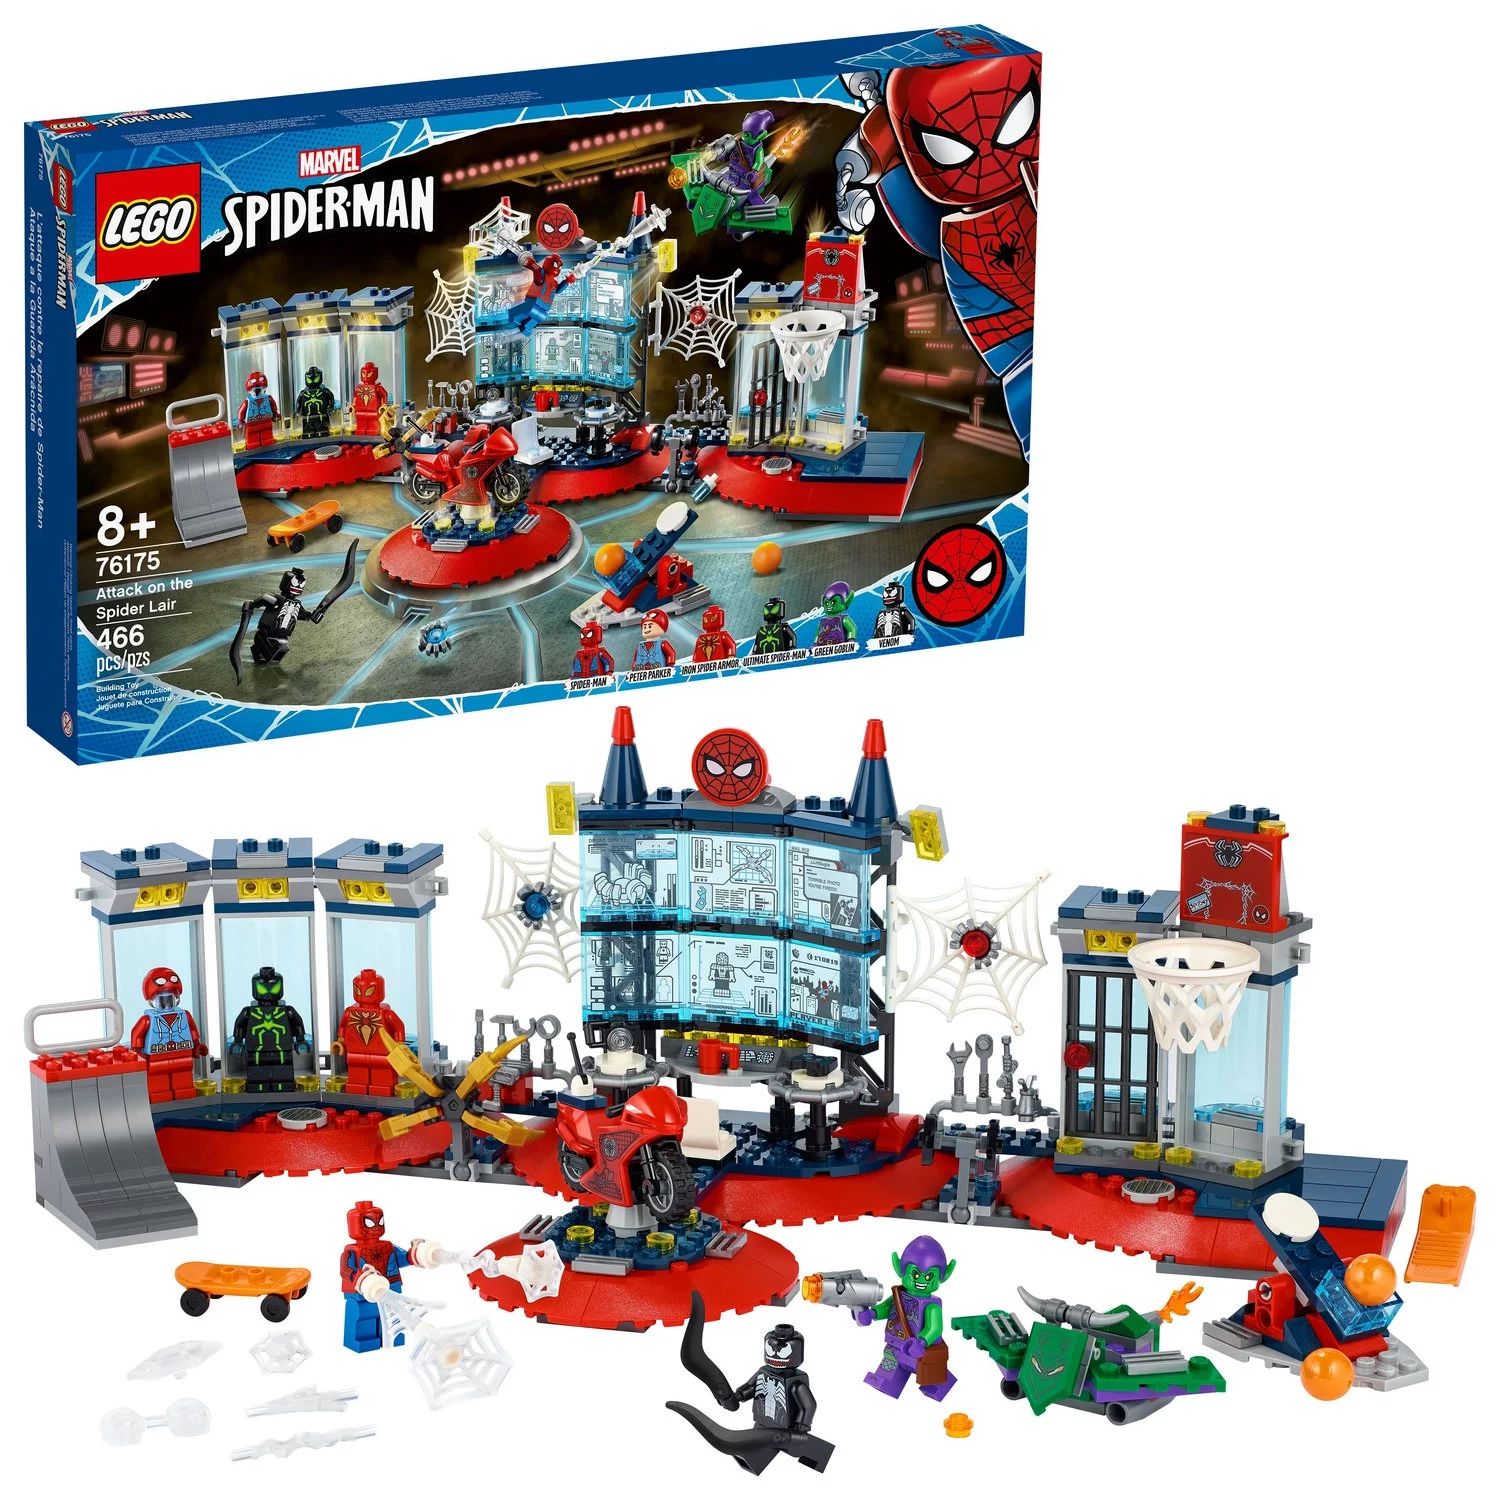 LEGO Marvel Spider-Man Attack on the Spider Lair 76175 Collectible Building Toy (466 Pieces) | Walmart (US)